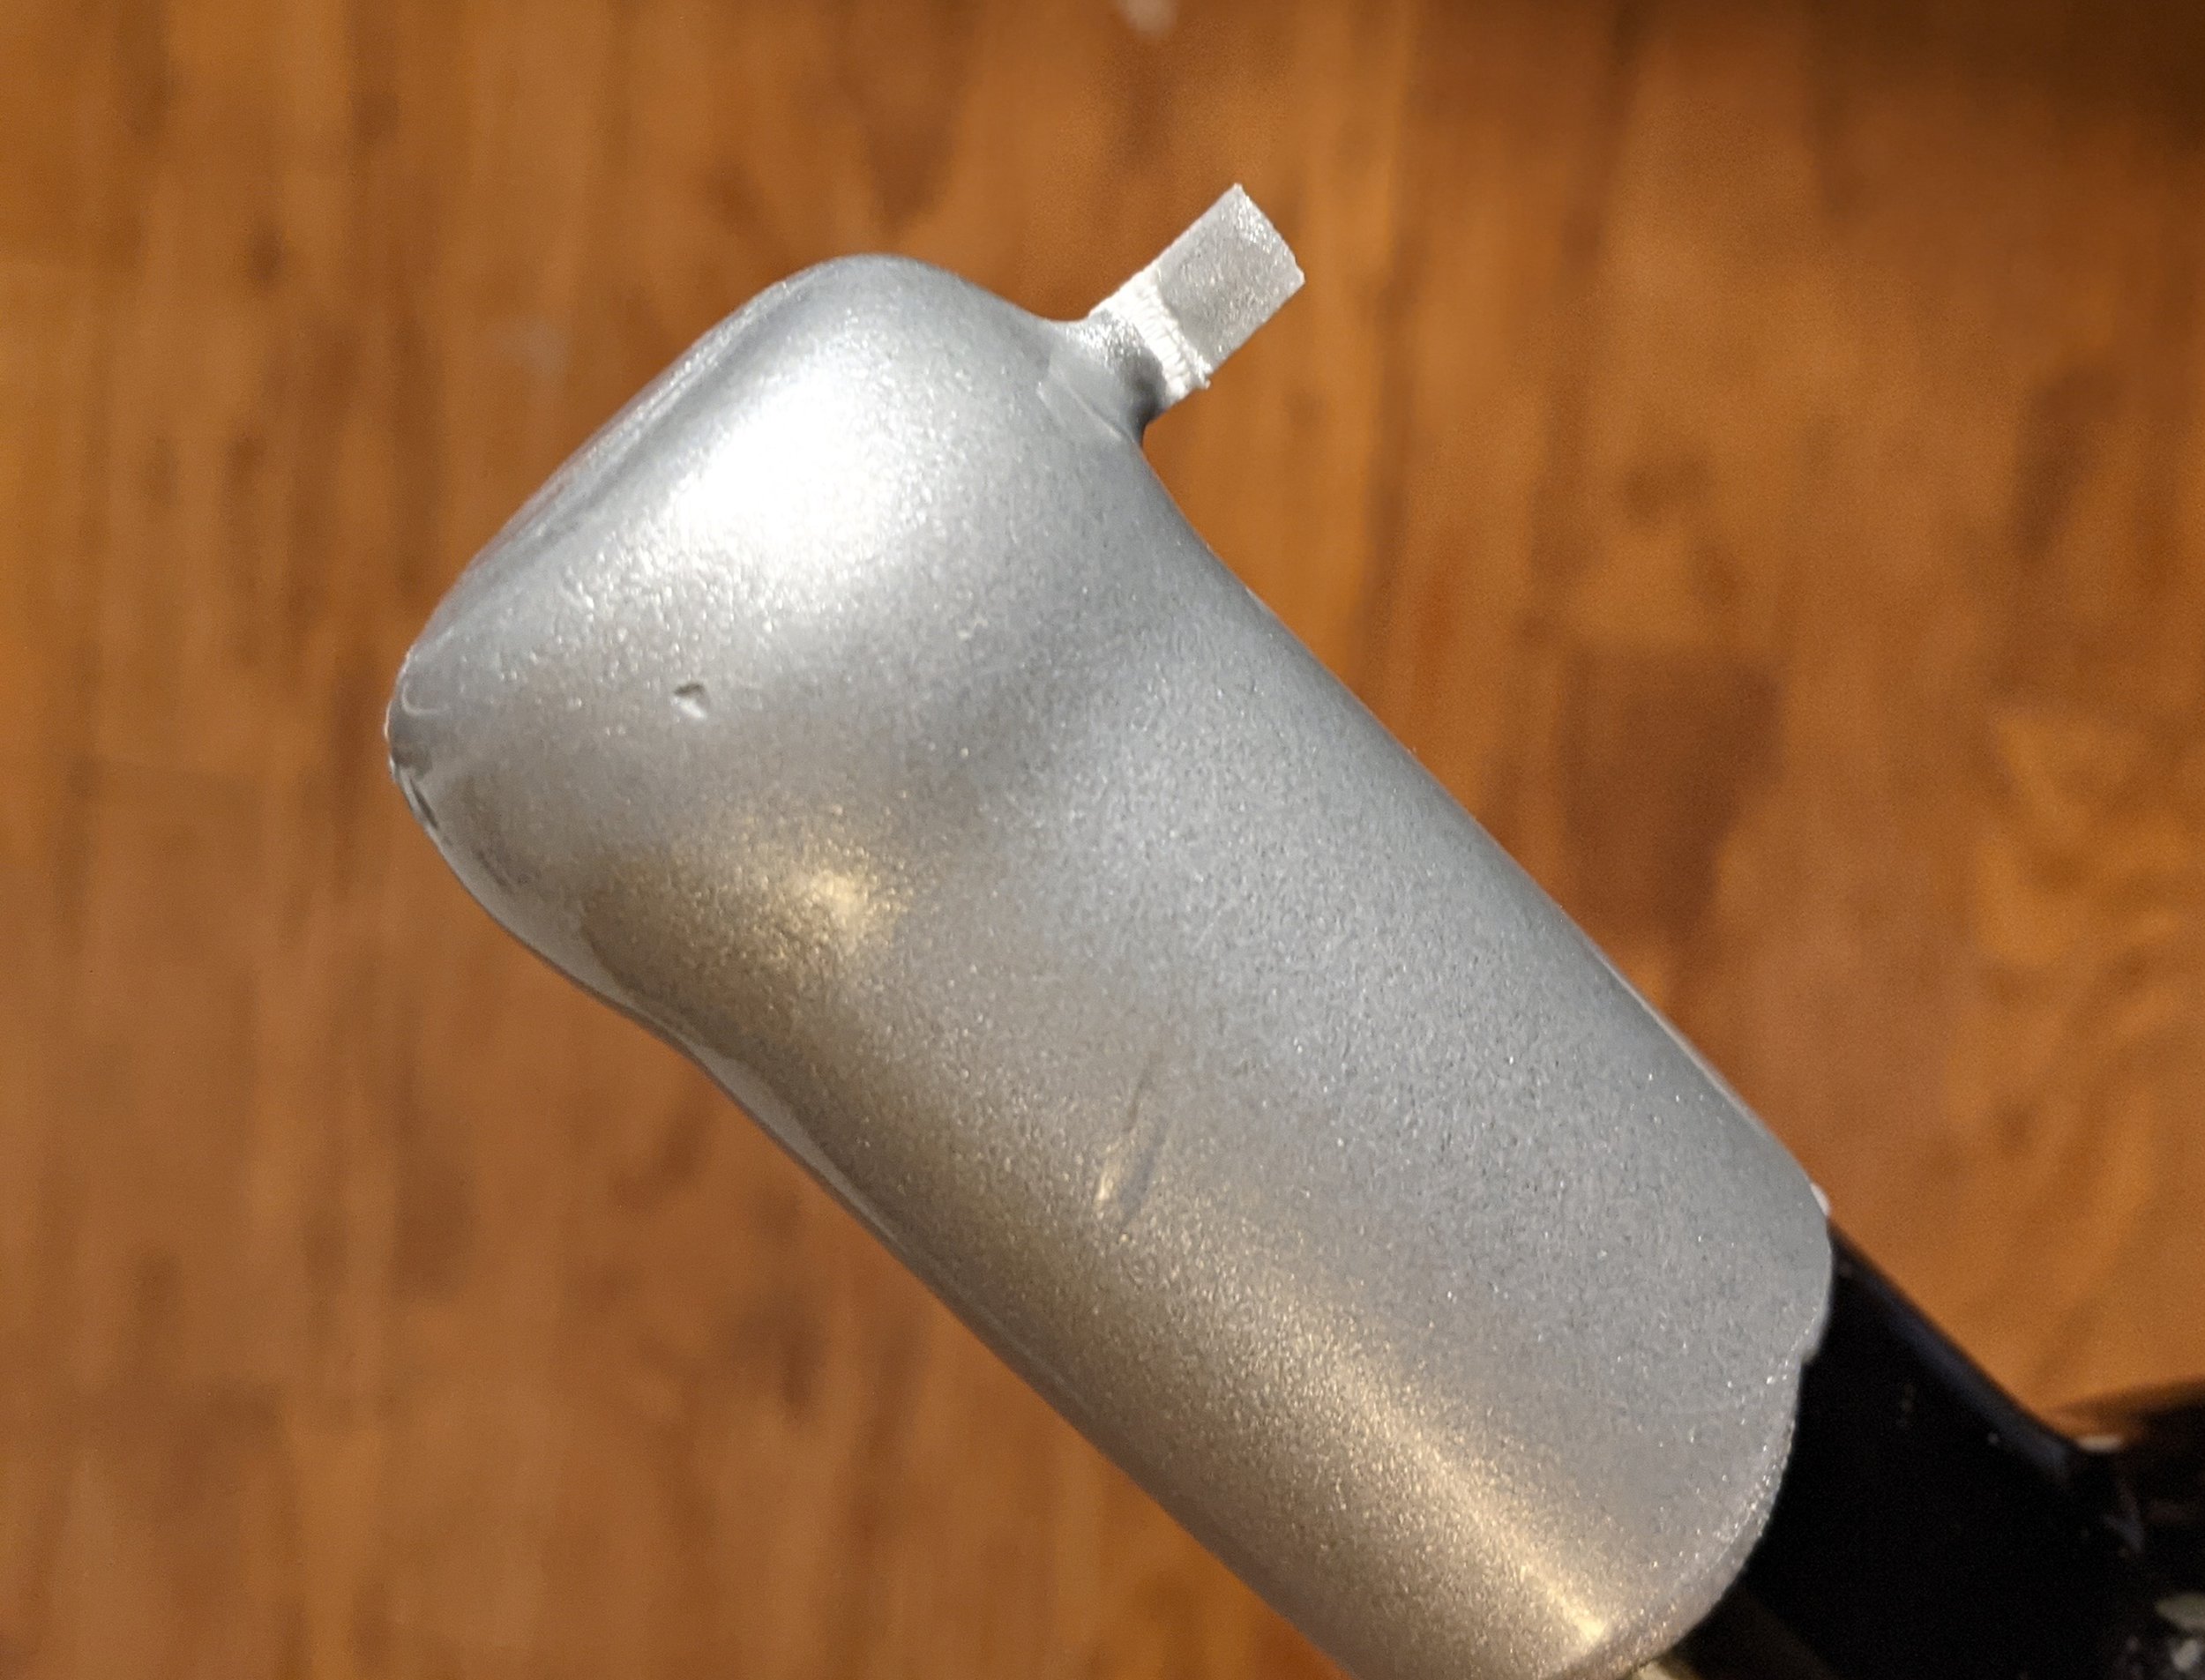 Wine bottle with wax pull tab - how to open a waxed wine bottle